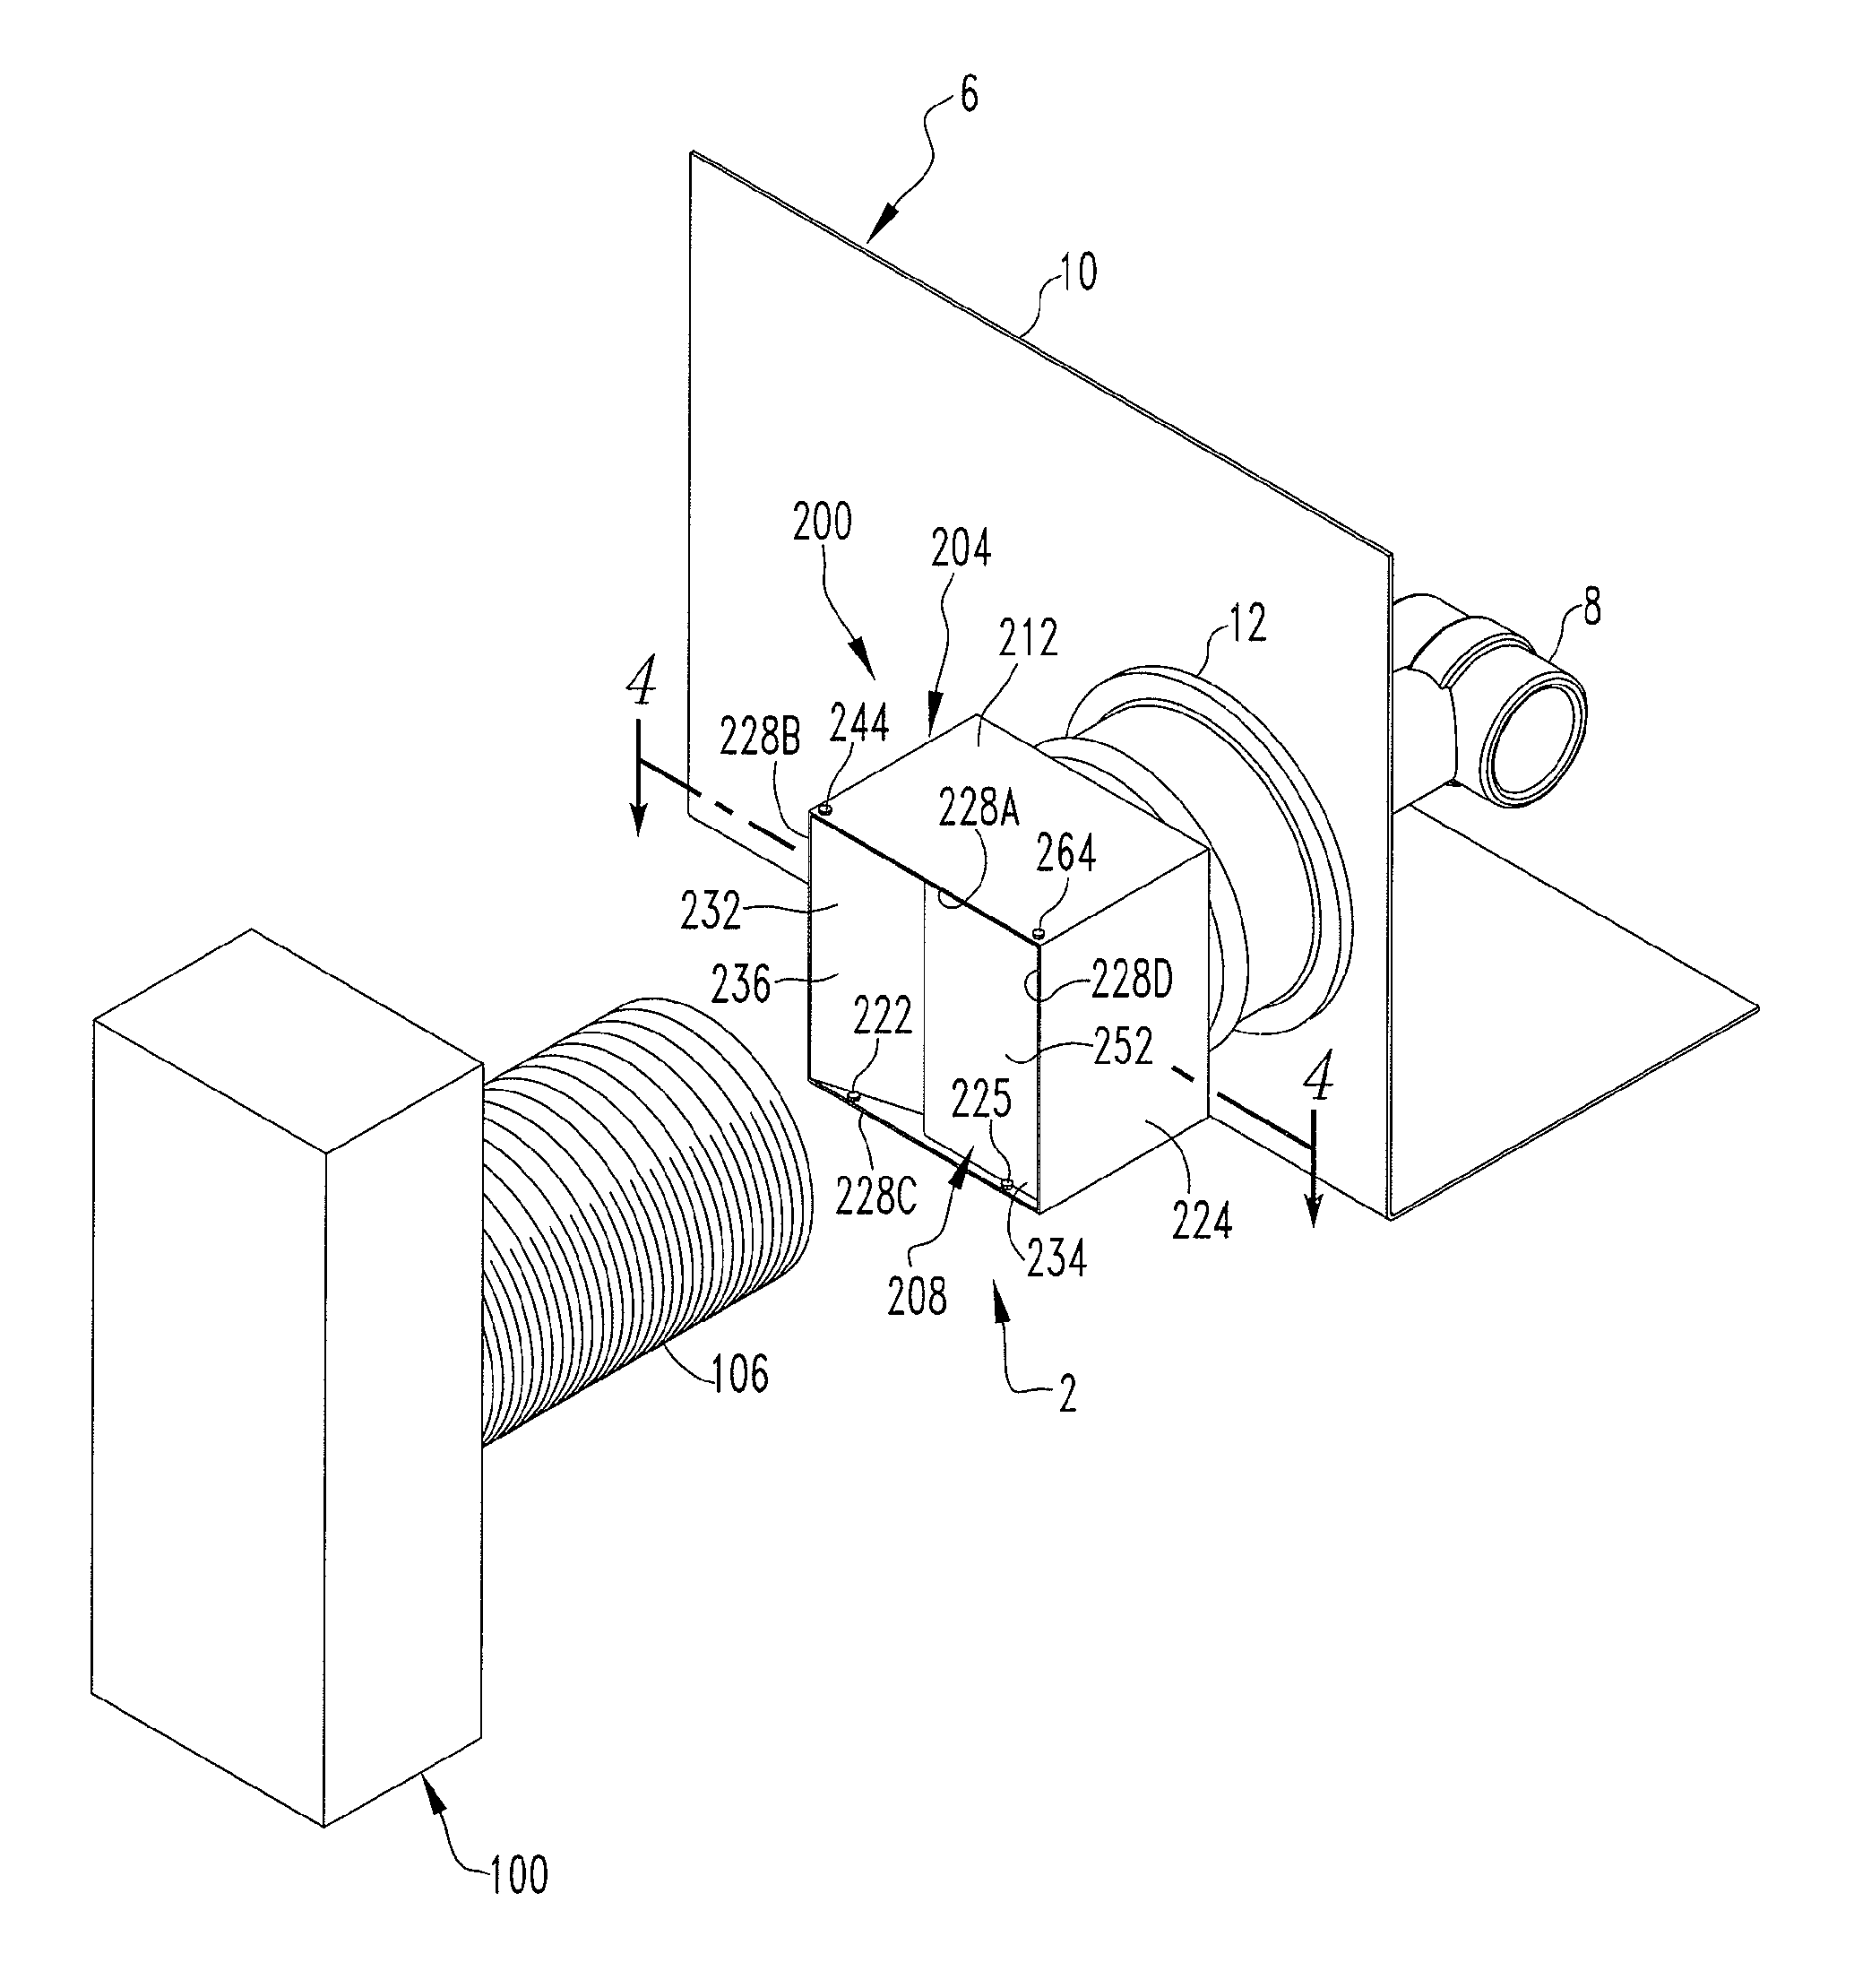 Electrical system having withdrawable electrical apparatus and shutter assembly